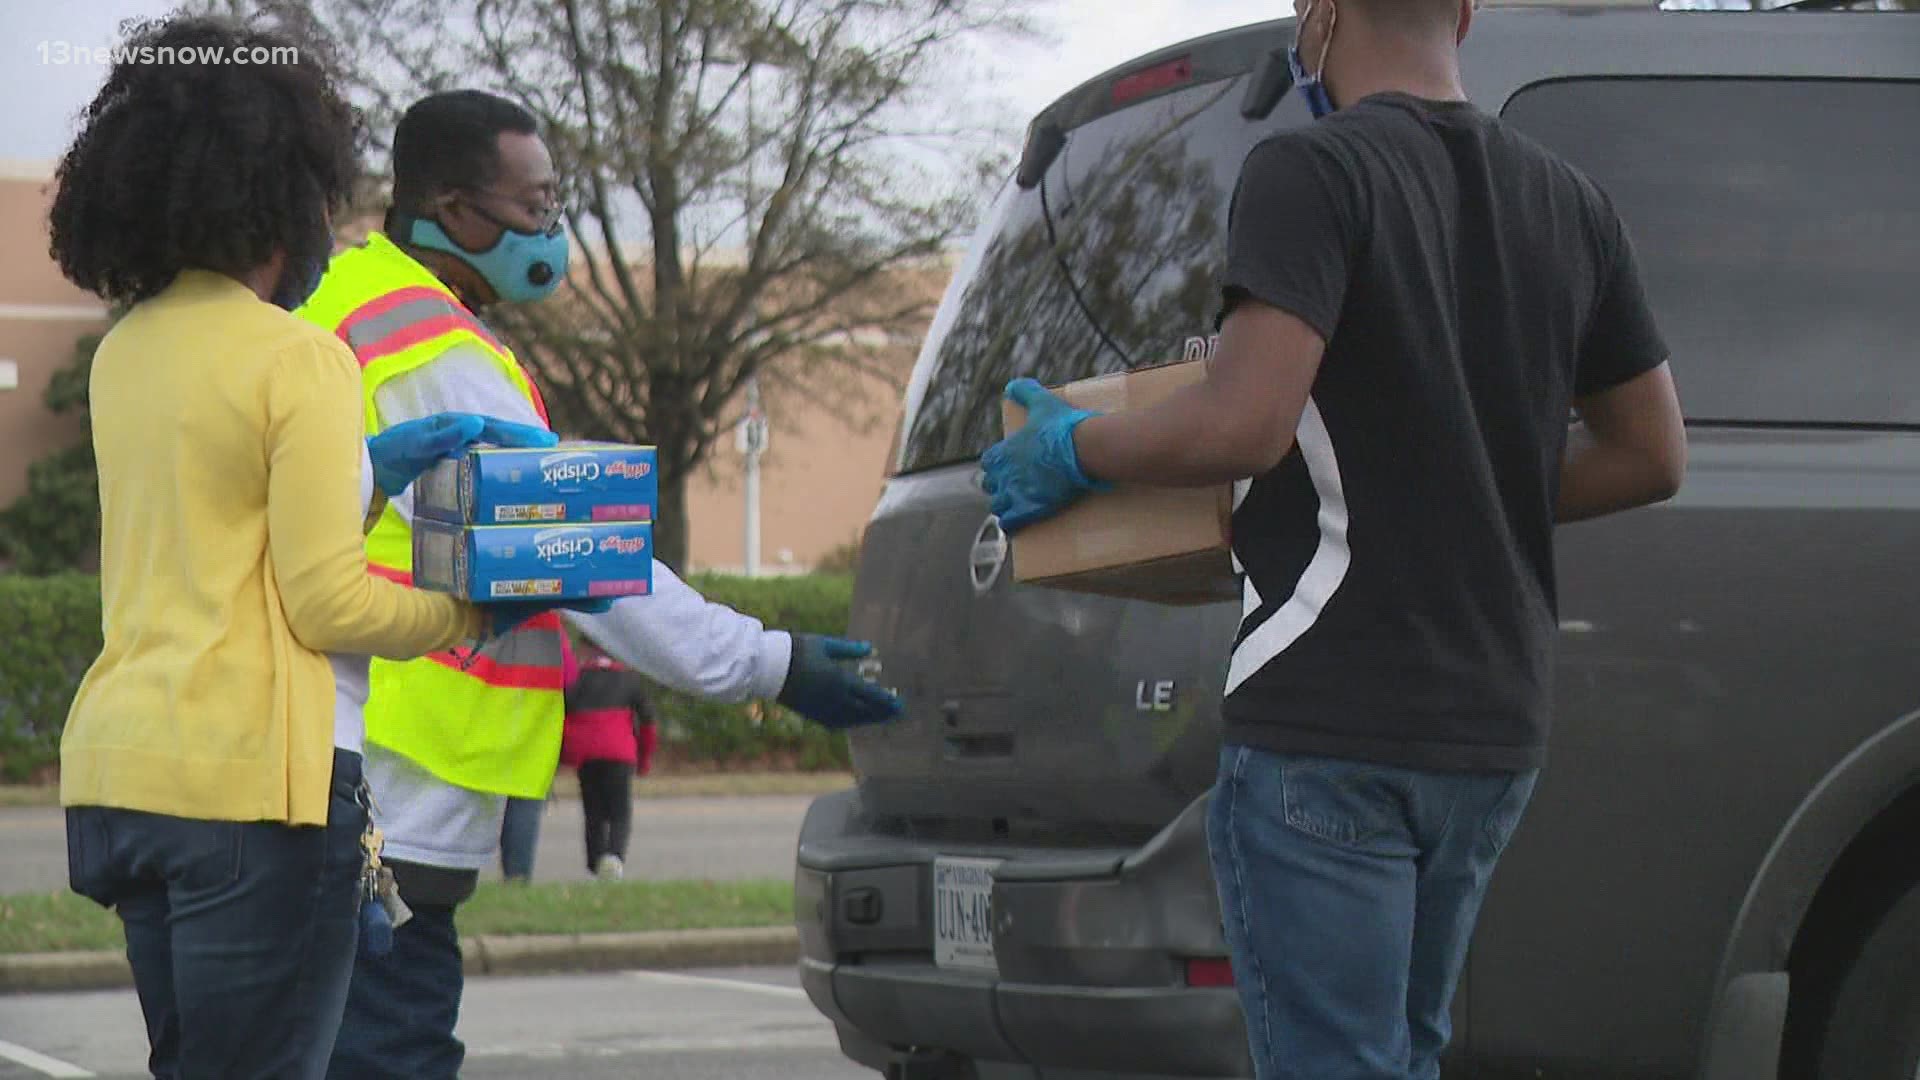 Calvary Revival Church had 4 pop-up locations throughout Norfolk to serve hot meals for Thanksgiving, as well as a week's worth of groceries to families in need.